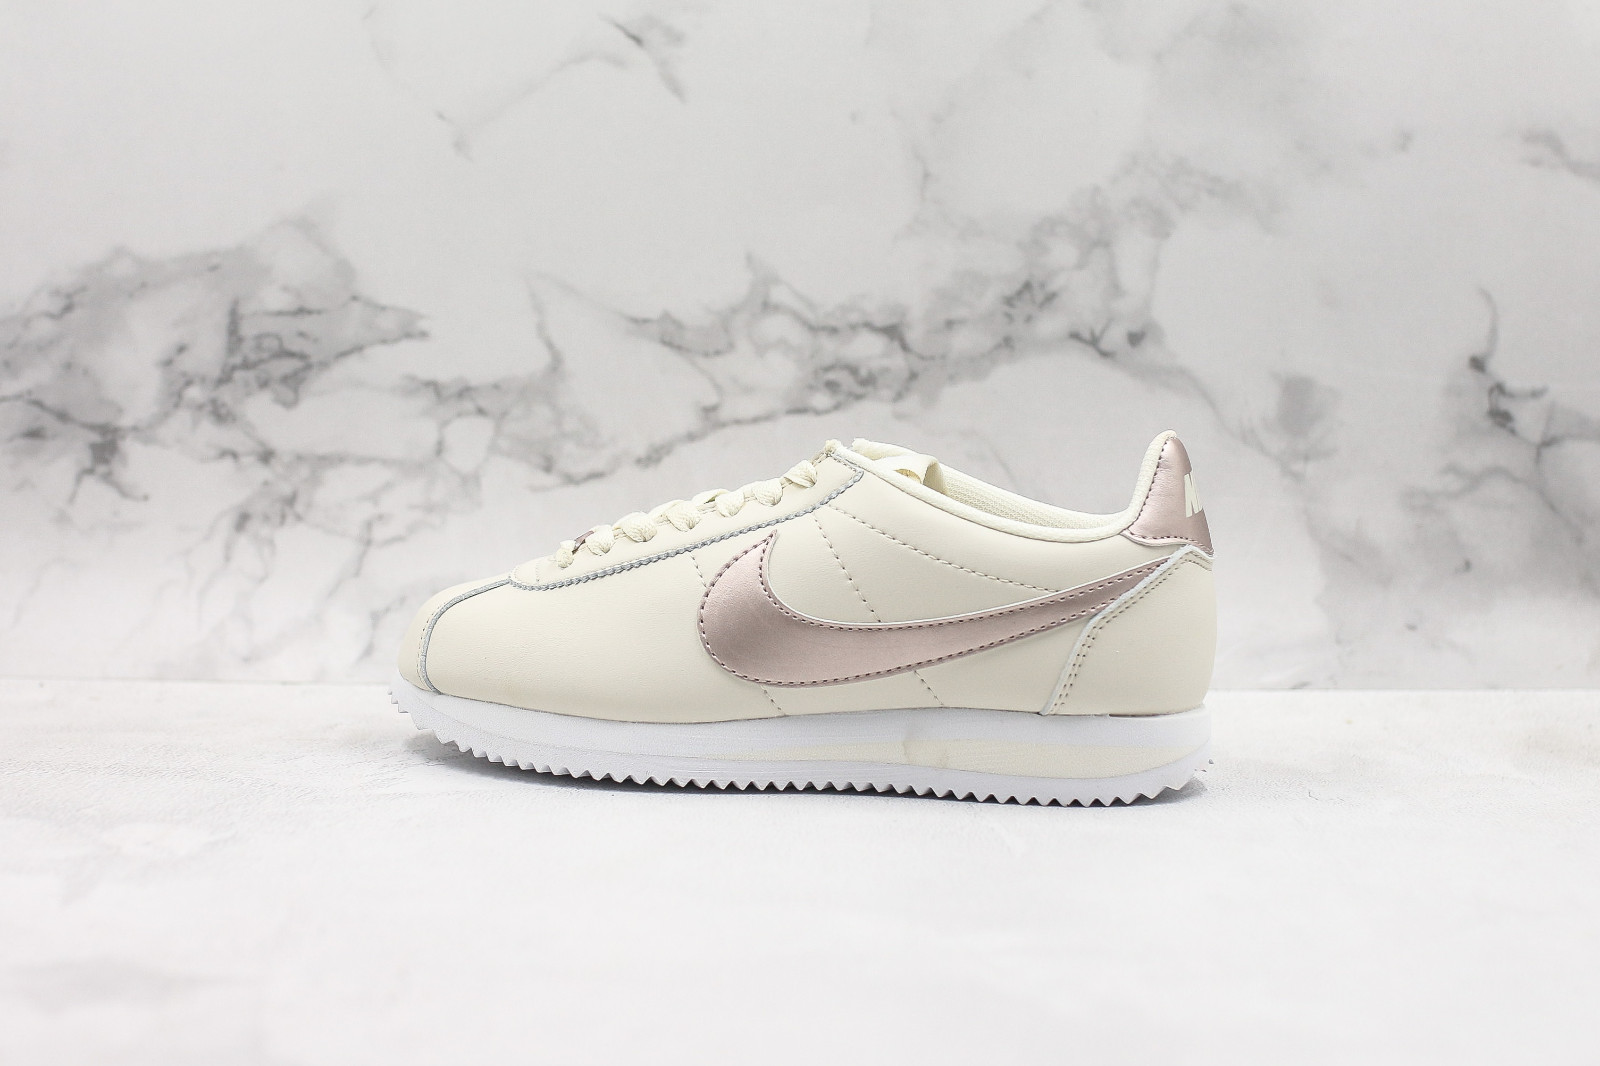 002 - Cortez Basic SL GS Red Bronze White Shoes AH7528 - sneakers mujer rojas talla 29.5 -